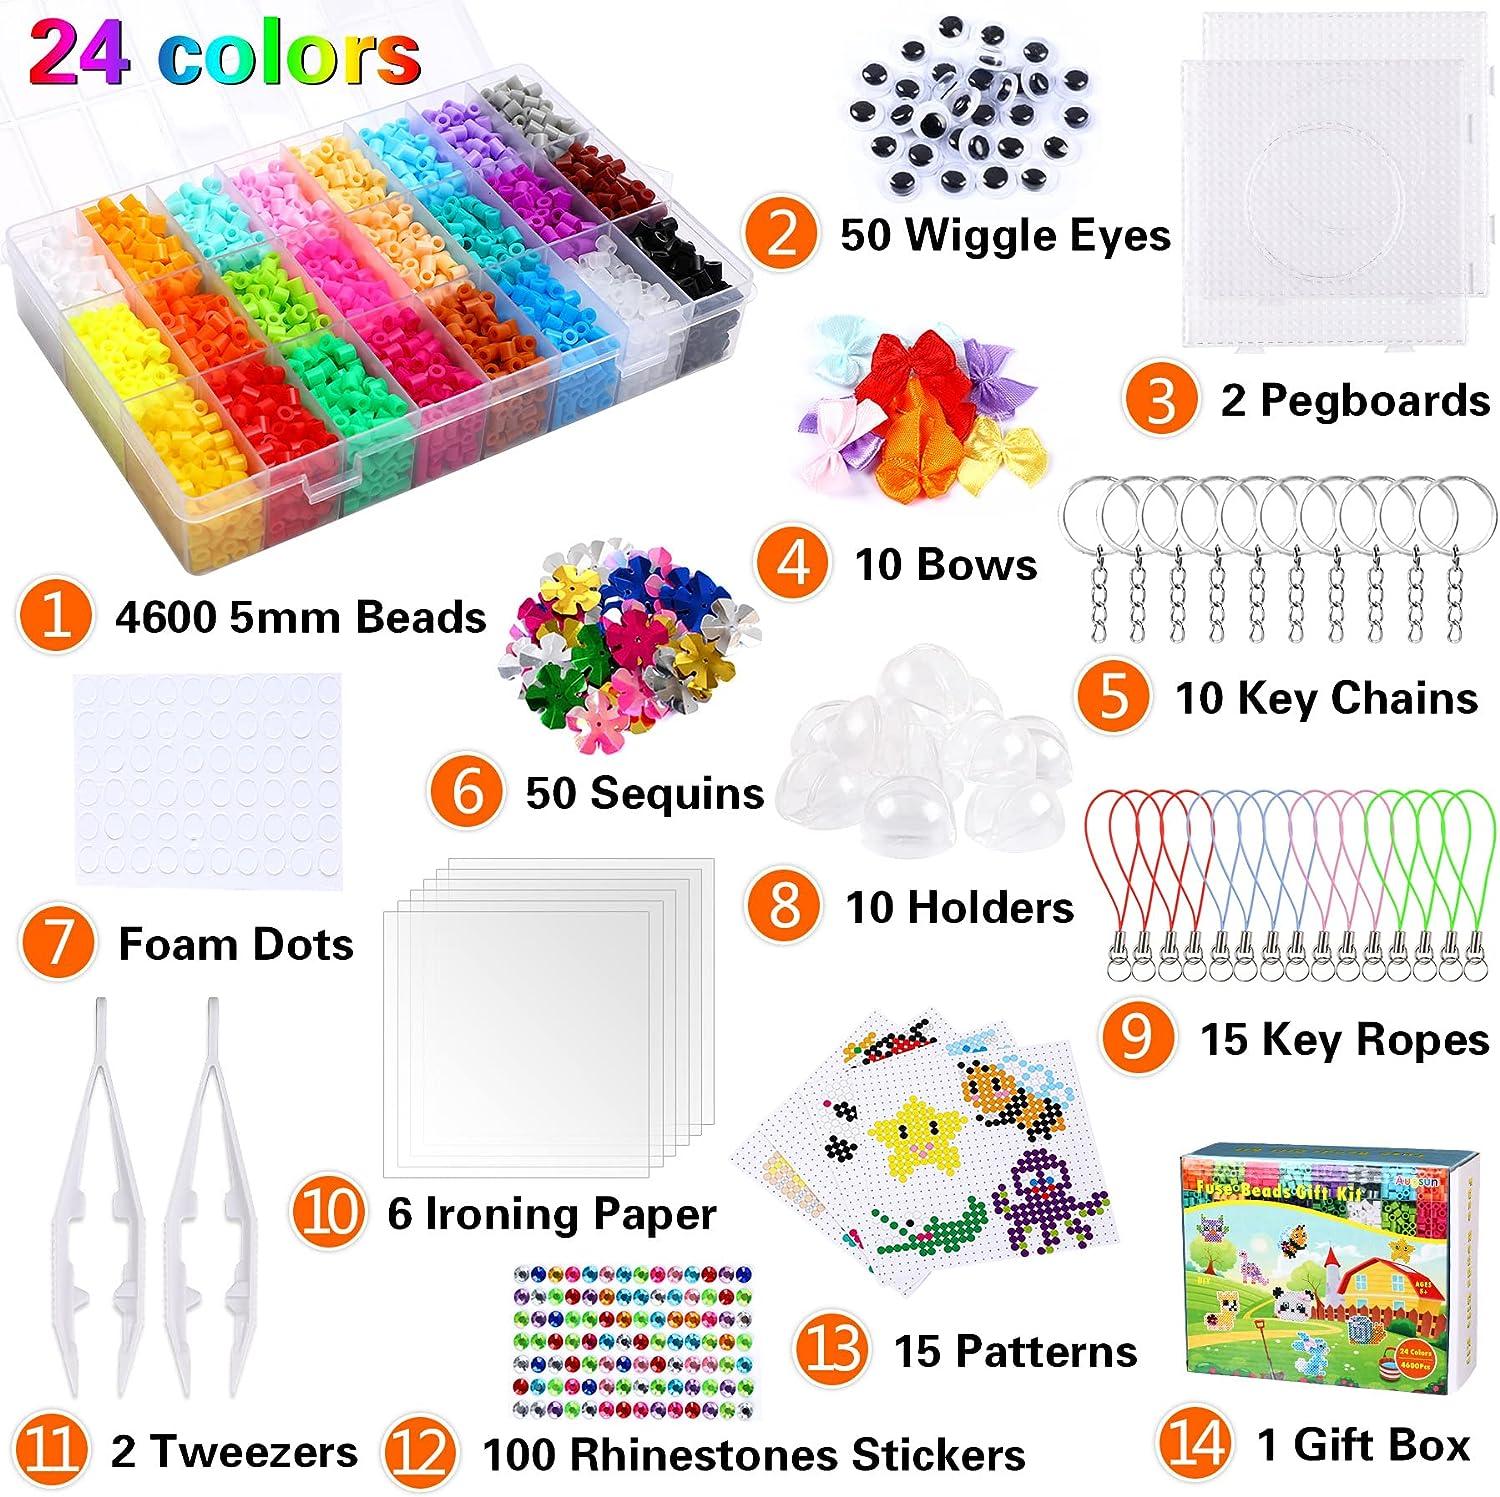 AUGSUN Fuse Beads Kit for Kids, 4600Pcs+ 24 Colors Crafting Melting Iron  Beads Set with 2 Pegboards, 15 Patterns, Ironing Paper & Wiggle Eyes  Accessories for Boys Girls Craft Making